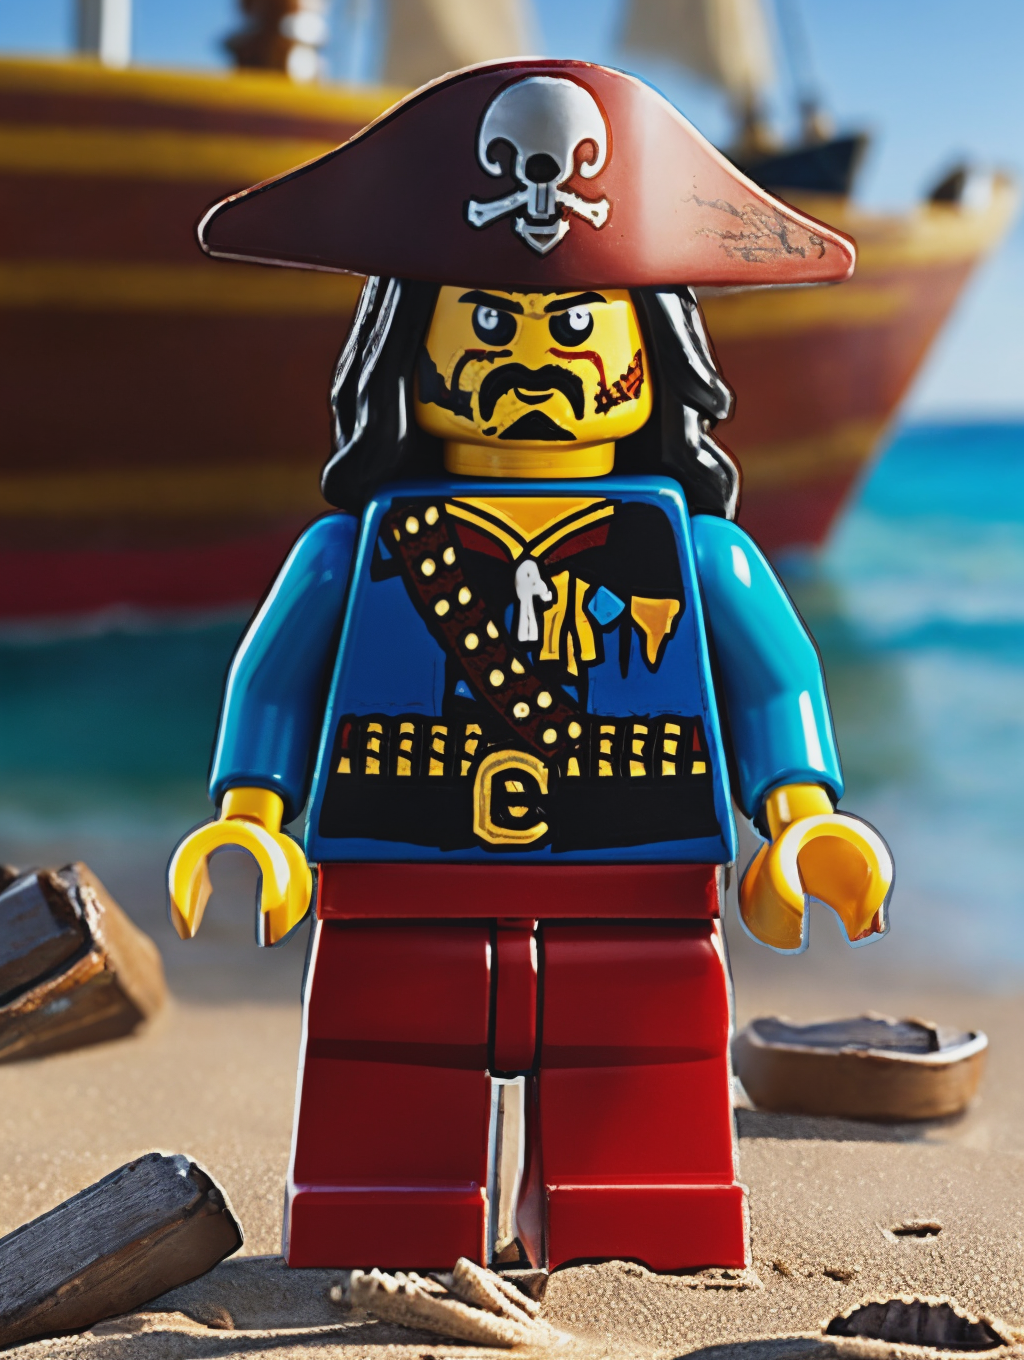 LEGO MiniFig, Jack Sparrow in the film of Pirates of the Caribbean, standing by a broken boat on beach <lora:lego_v2.0:0.8...